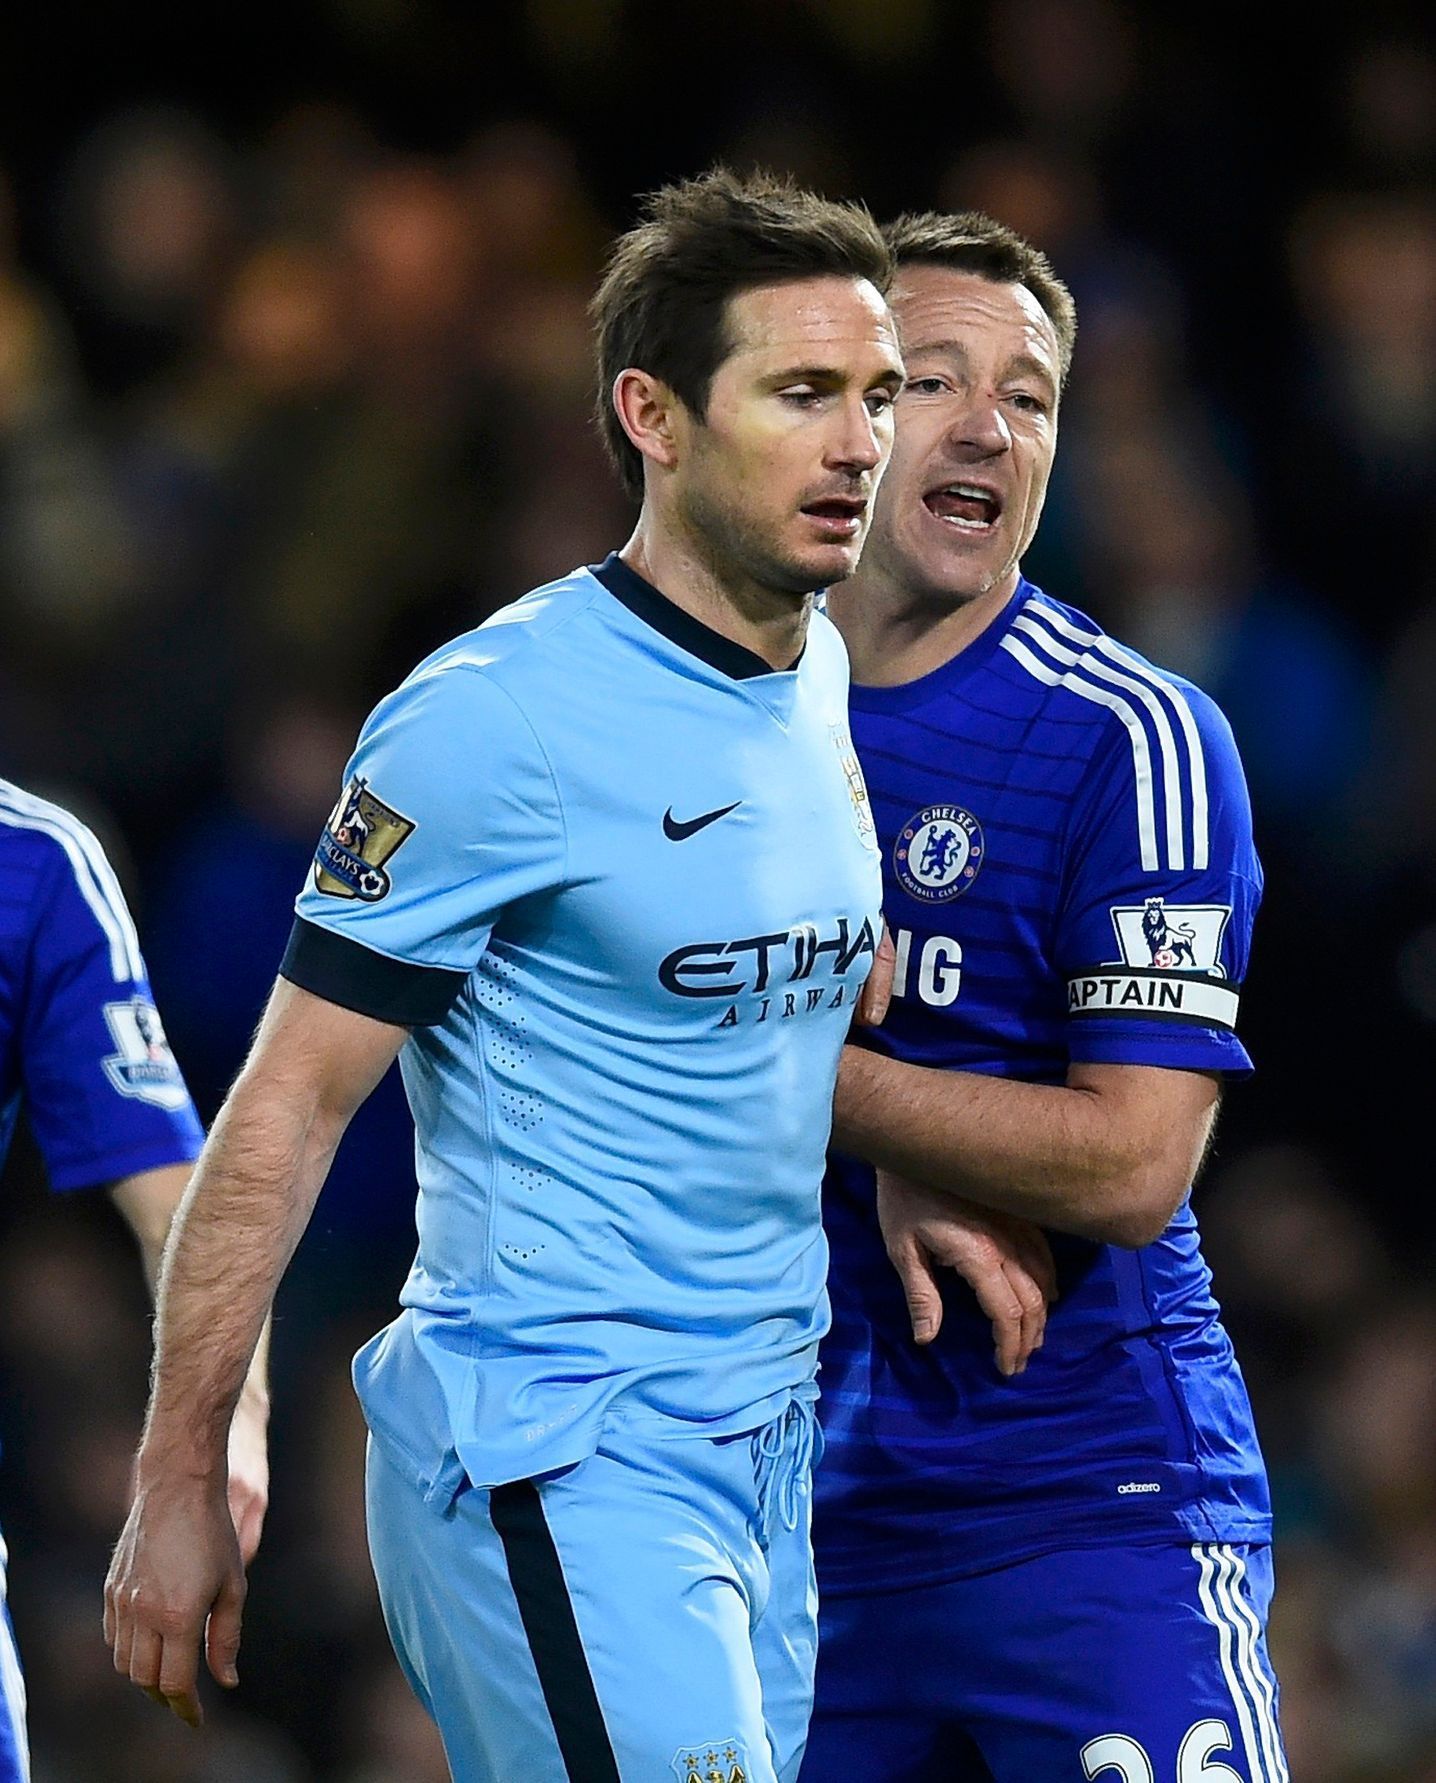 Chelsea - Manchester City (Lampard, Terry)